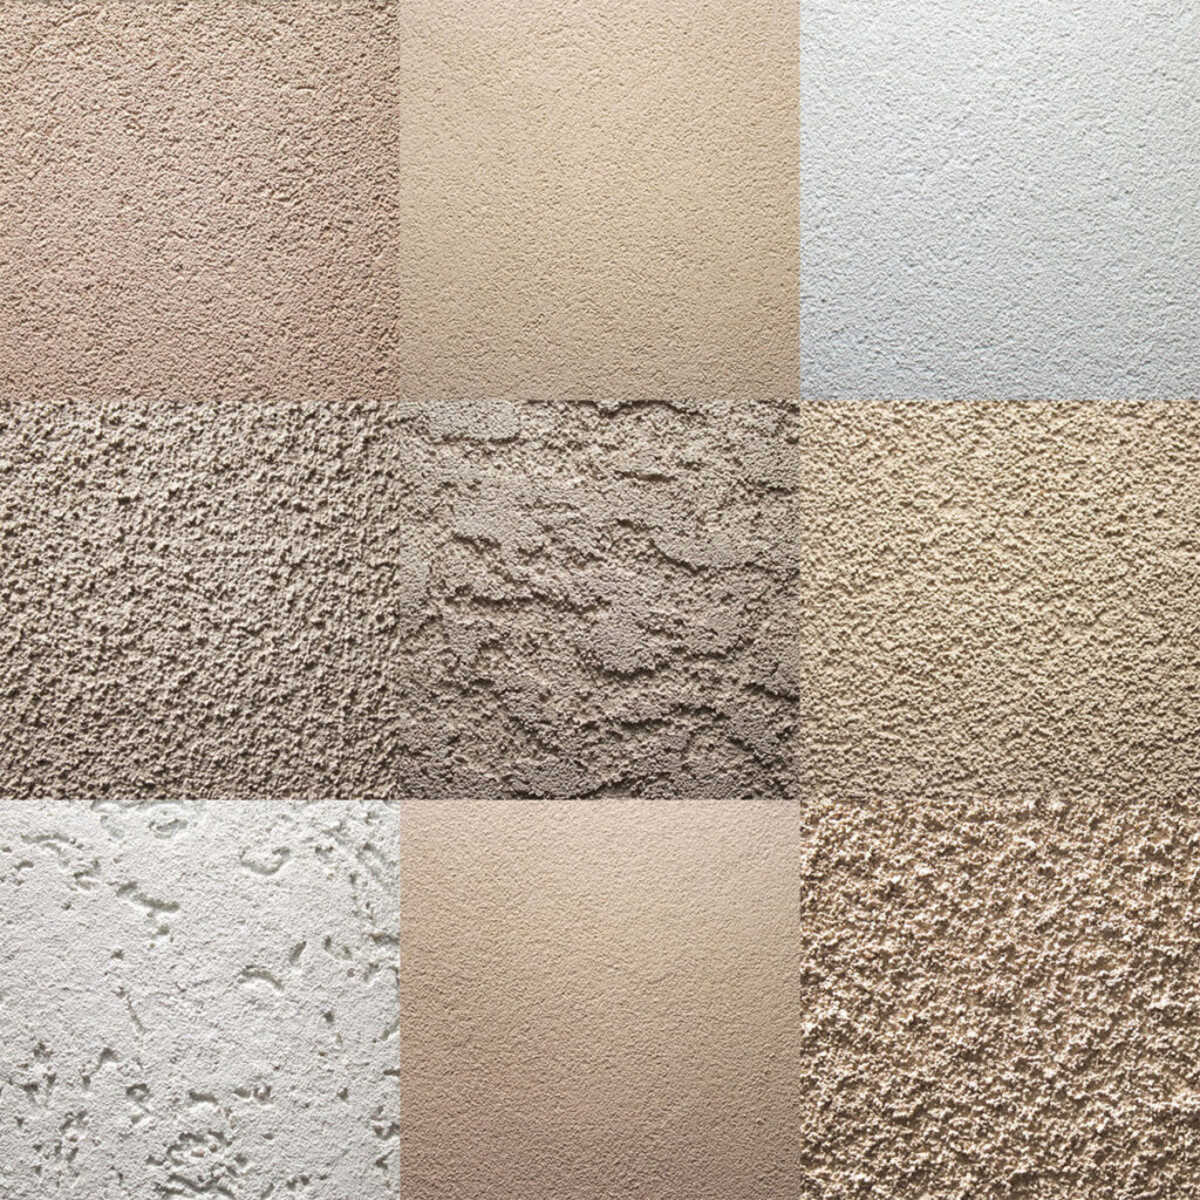 What Are The Different Types Of Stucco Finishes